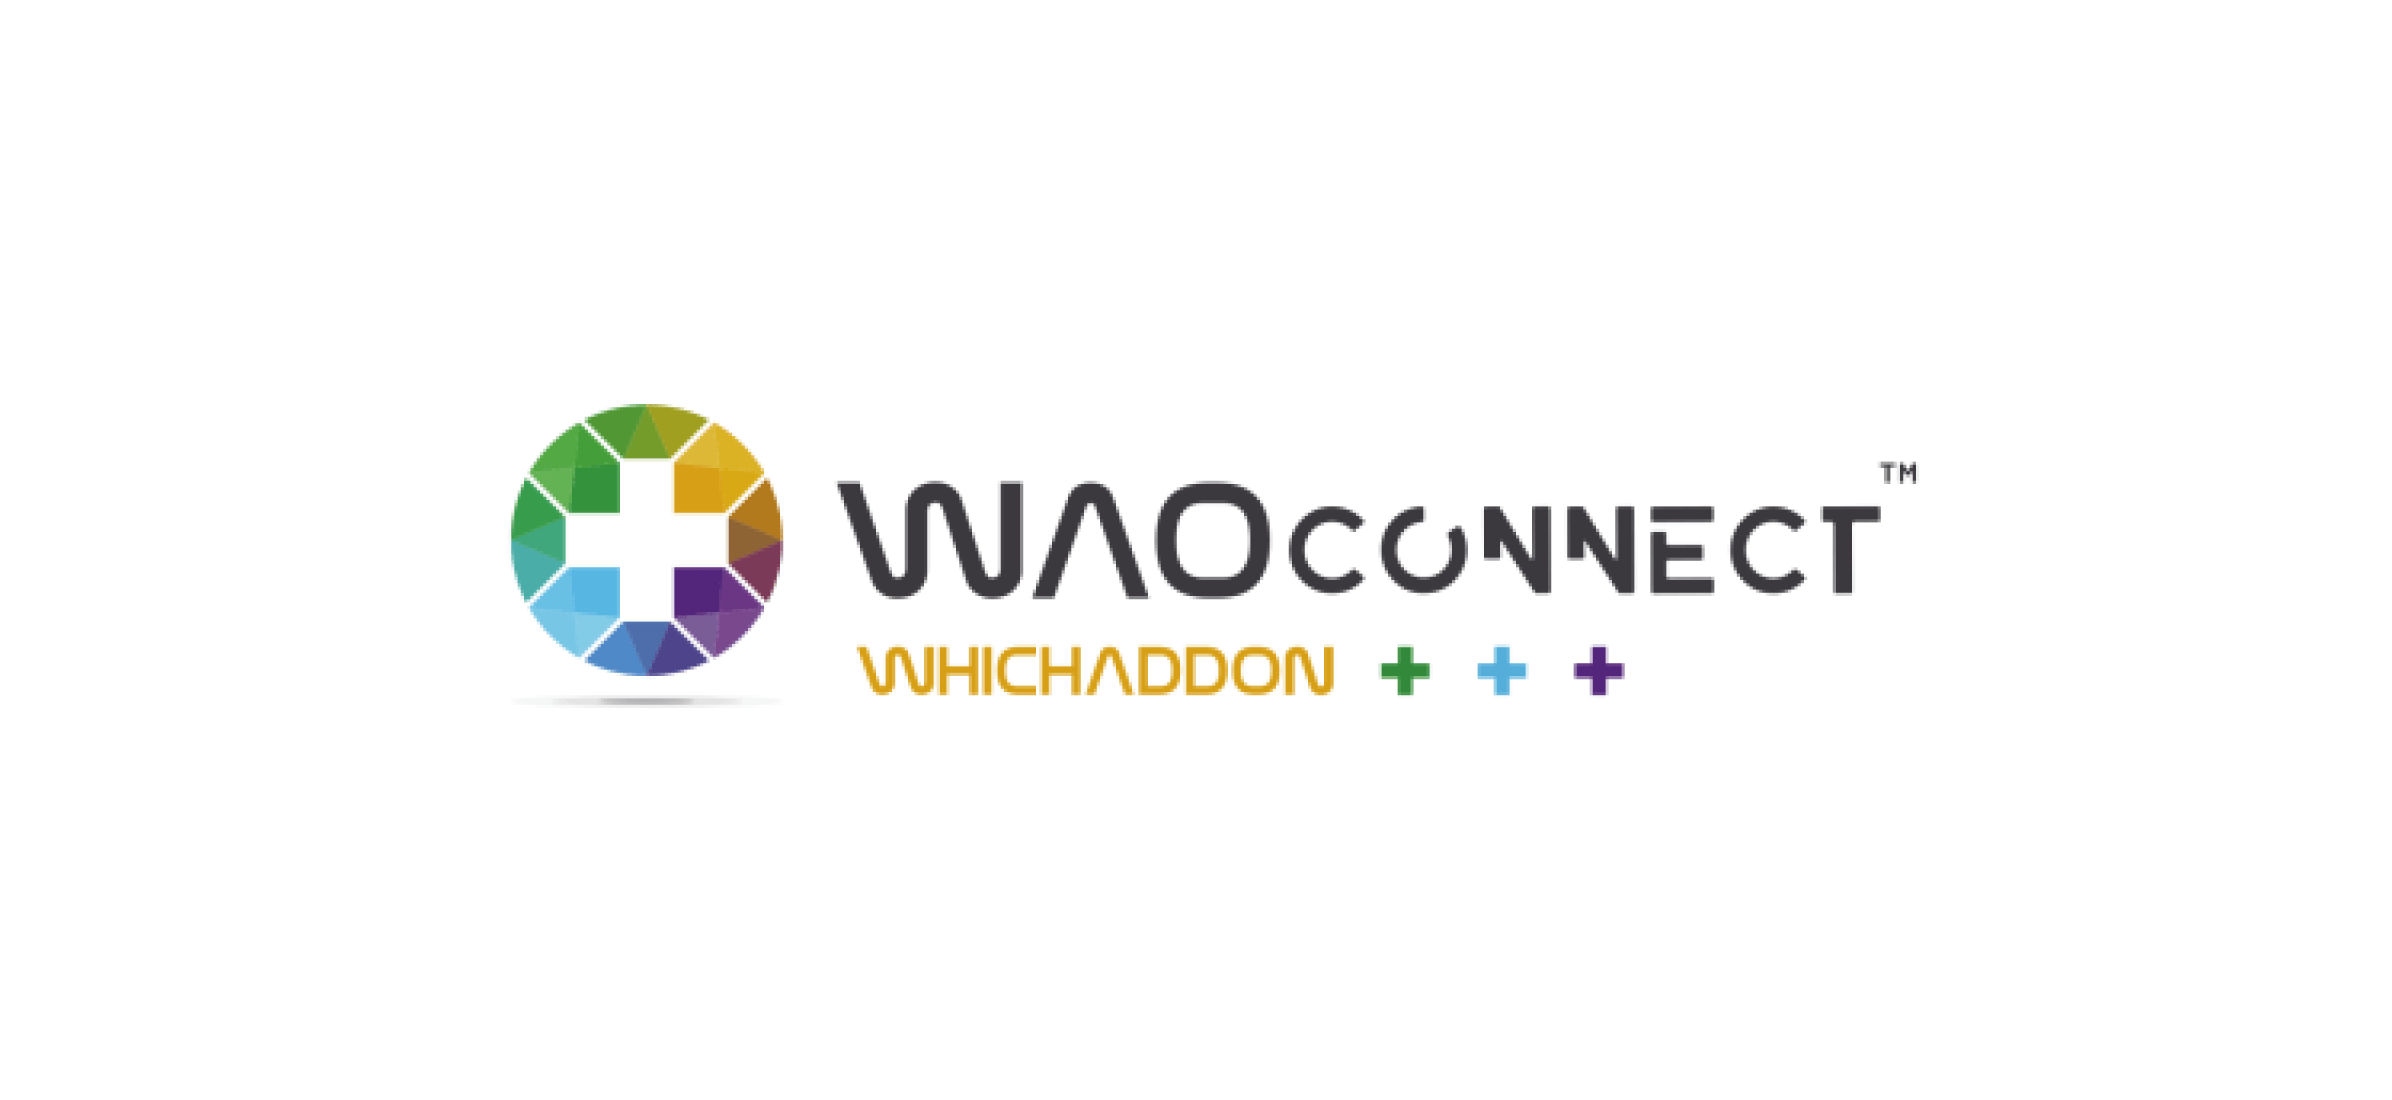 The WAOConnect logo